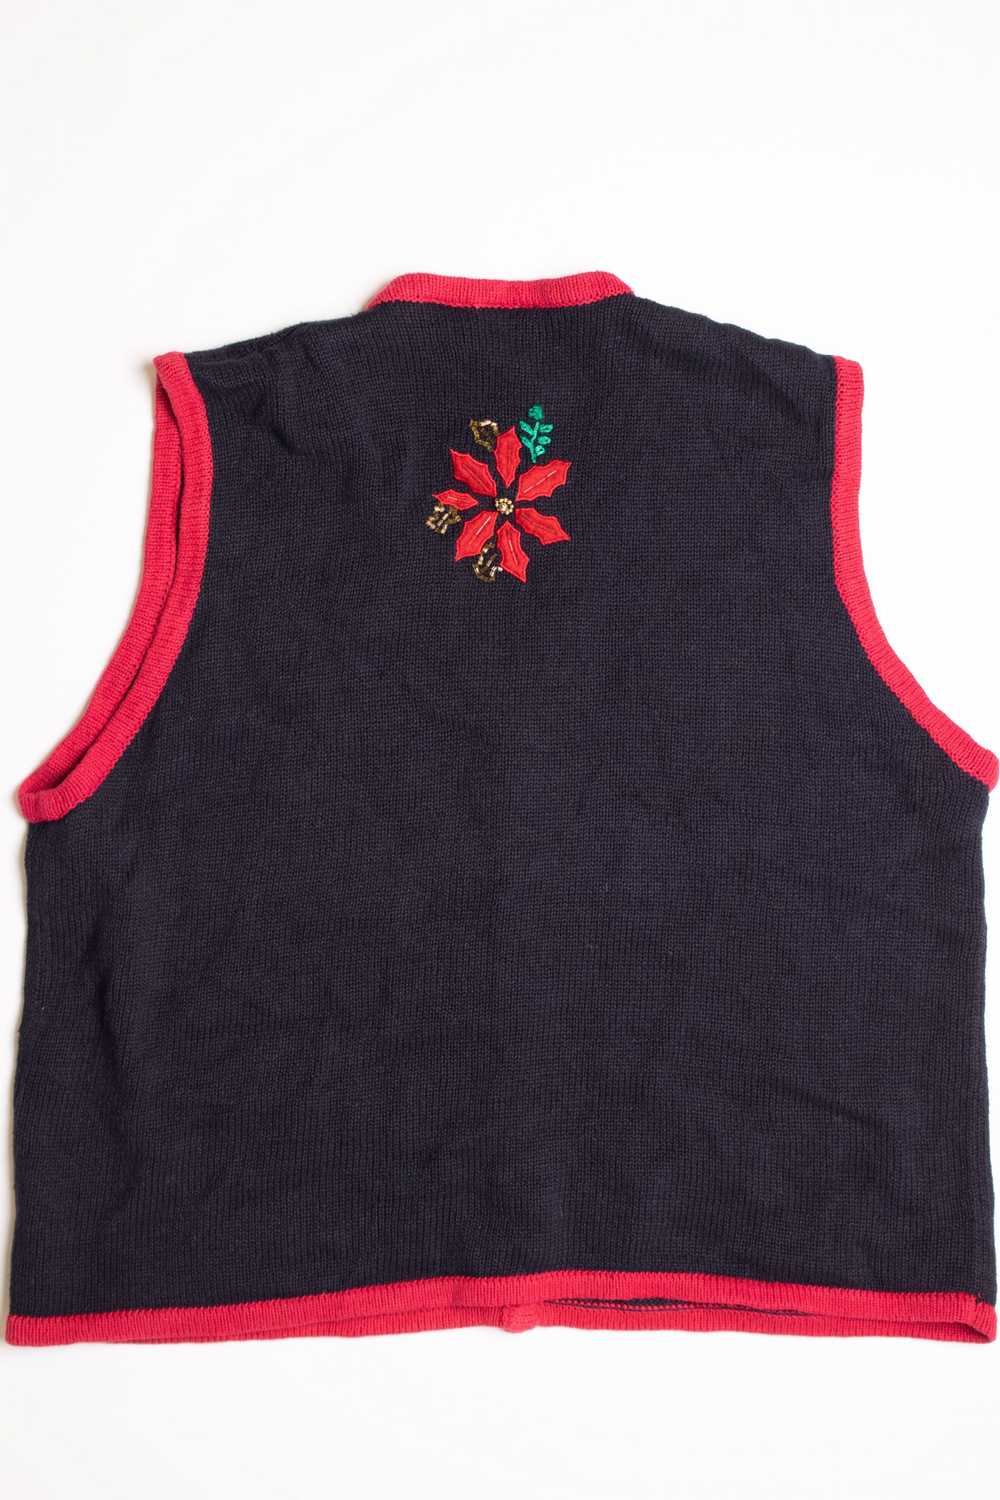 Ugly Christmas Sweater Vest 104 - image 1